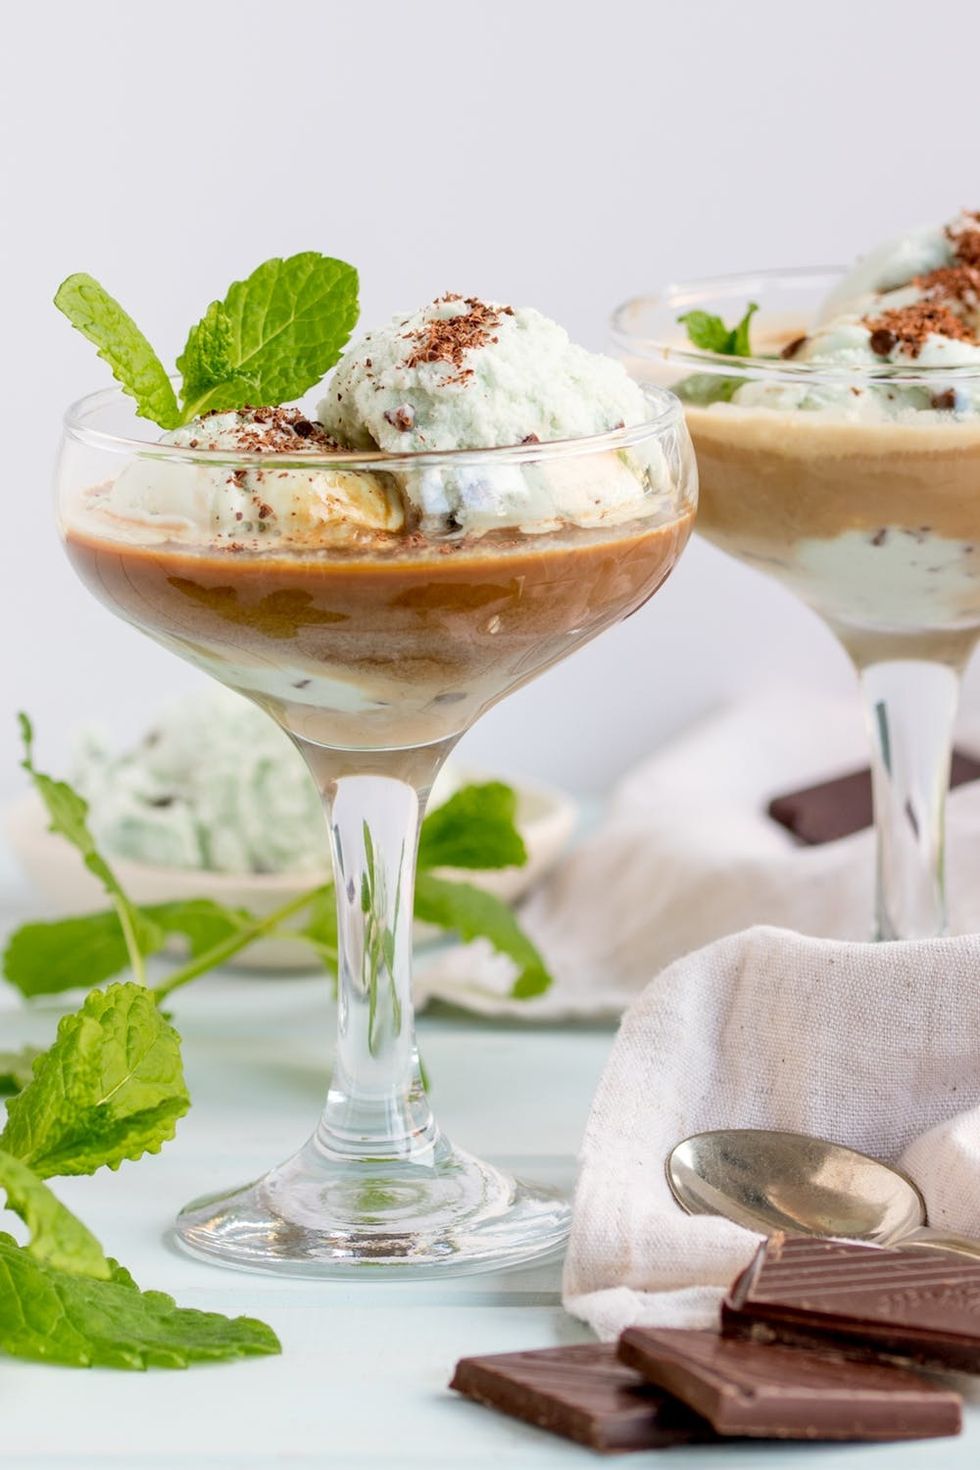 We Just Upgraded Our Affogato Recipe For St Paddy's Day With Boozy Irish Coffee And Mint Choc Chip Ice Cream!